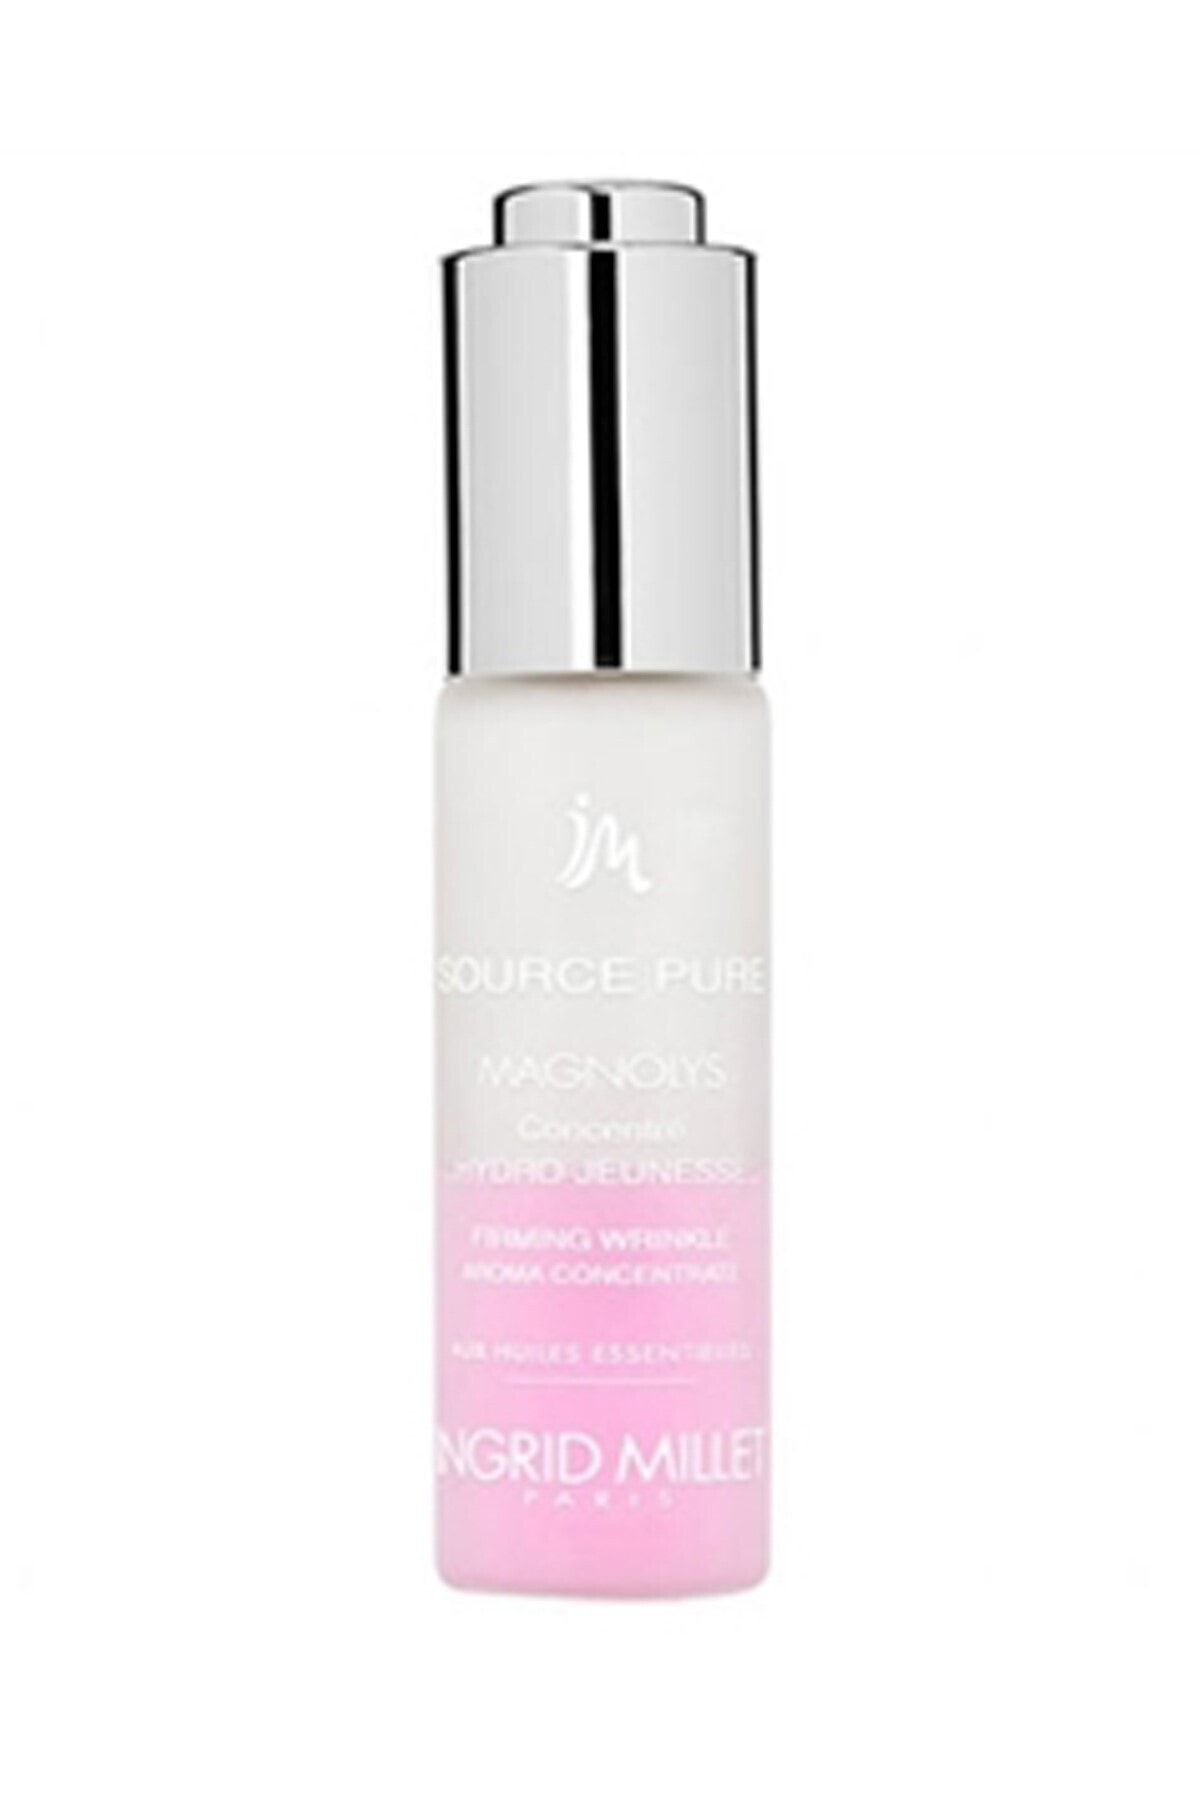 INGRID MILLET Source Pure Magnolys Firming Wrinkle Aroma Concentrate Serum 30 Ml